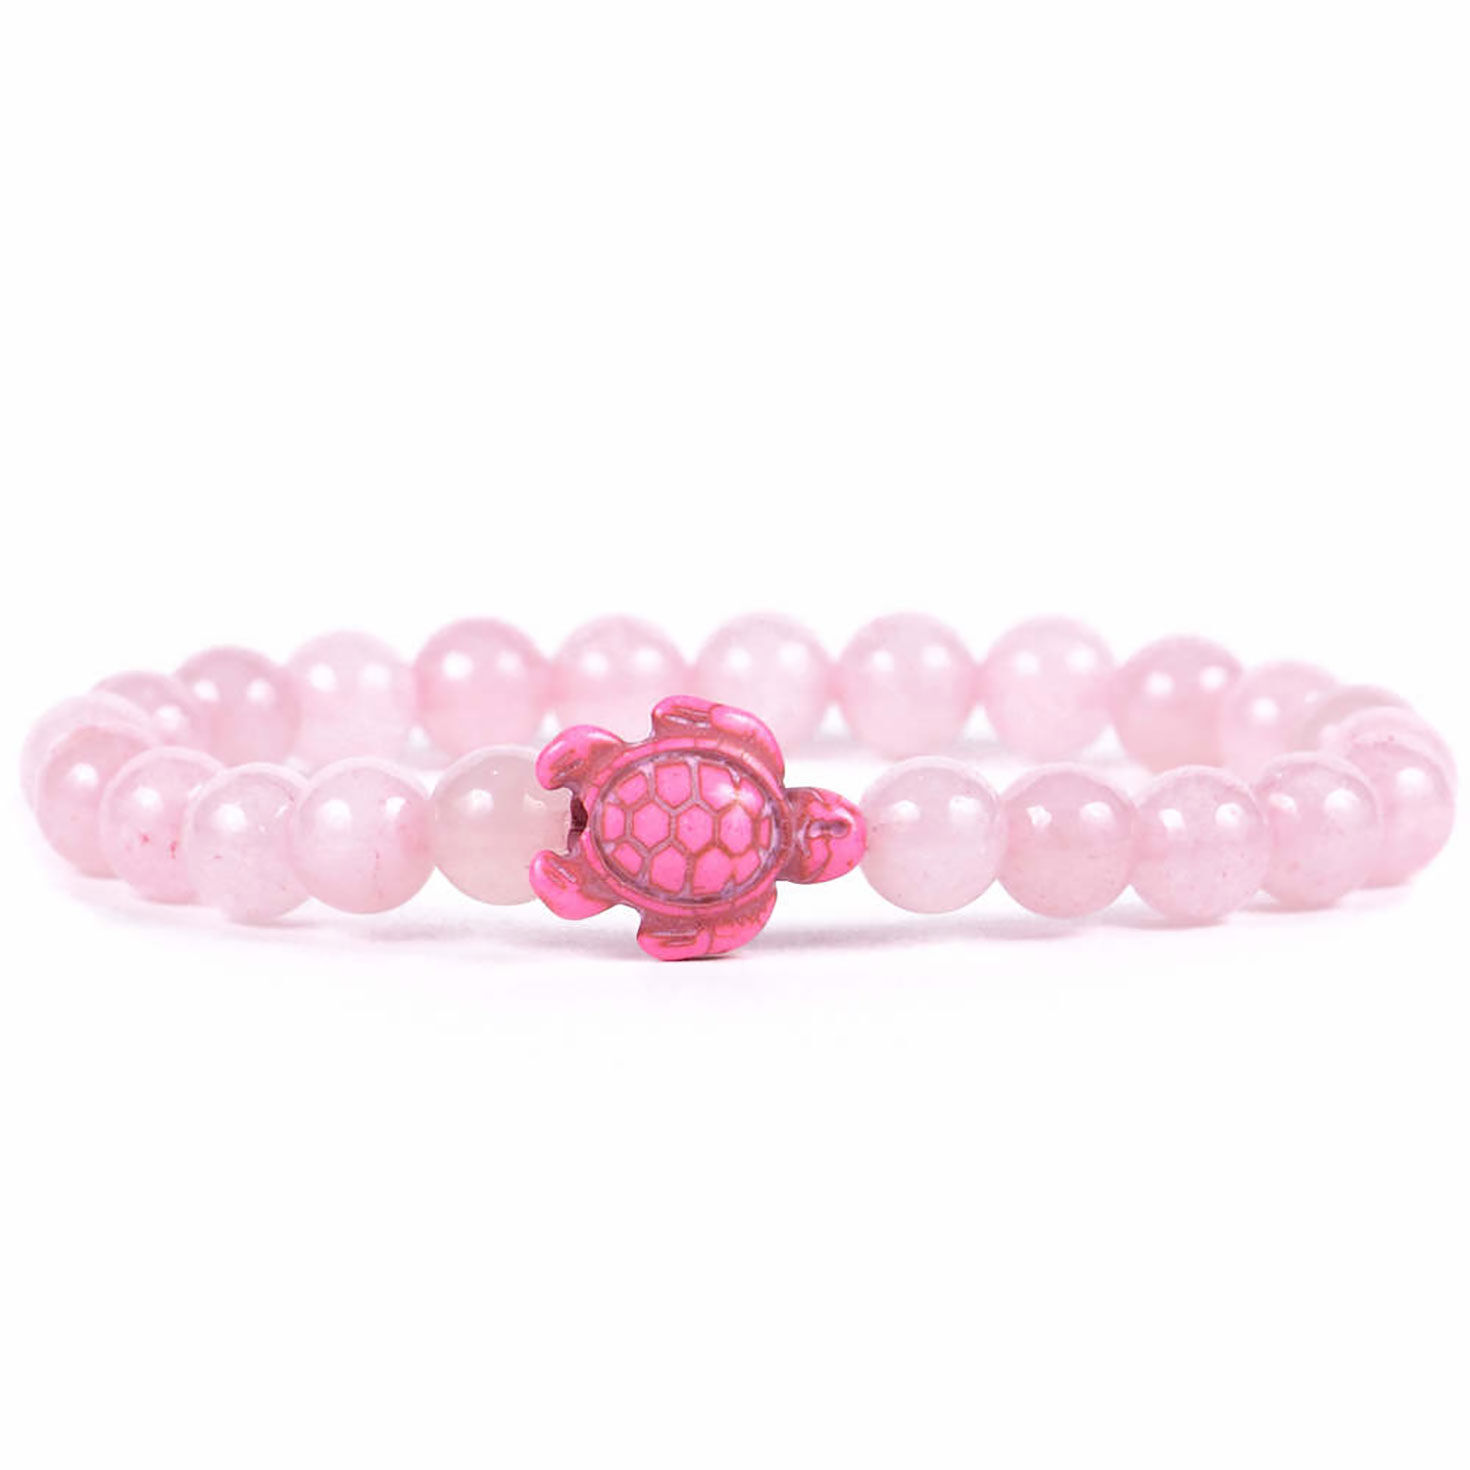 Fahlo Pink Stone Limited Edition Turtle Journey Bracelet for only USD 18.99 | Hallmark